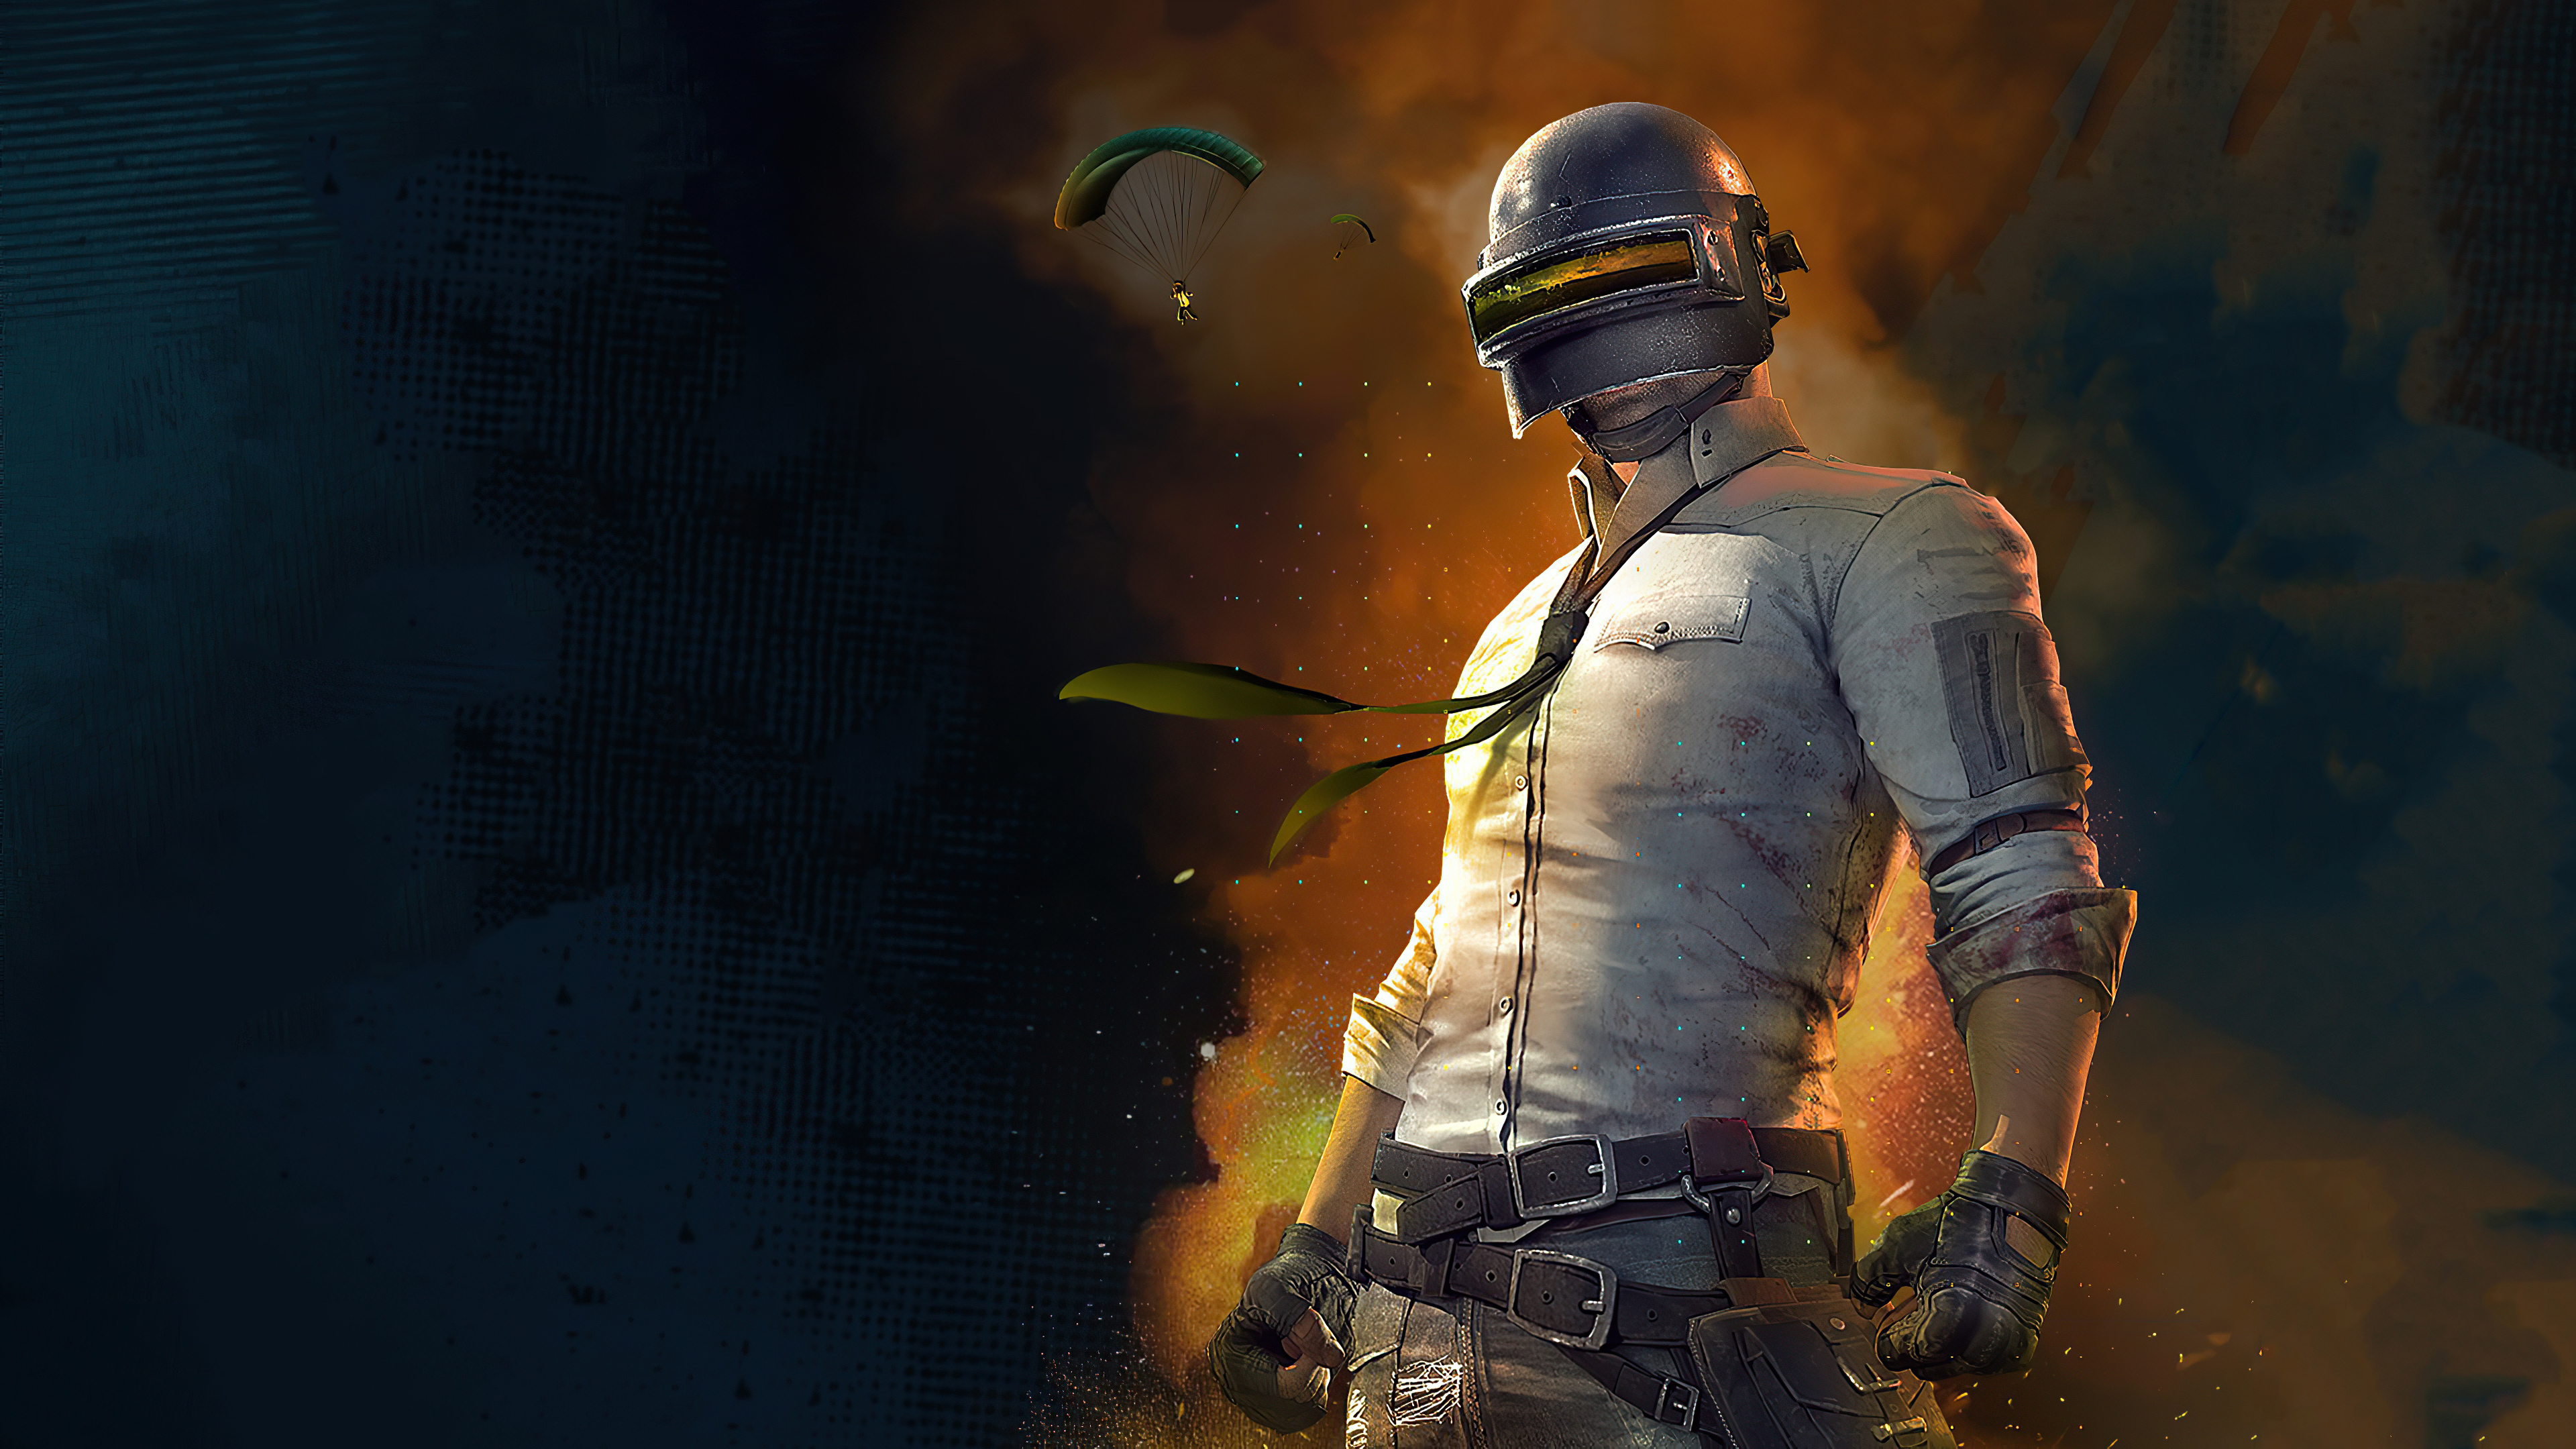 Pubg Helmet Guy 2020 4k New, HD Games, 4k Wallpapers, Images, Backgrounds,  Photos and Pictures